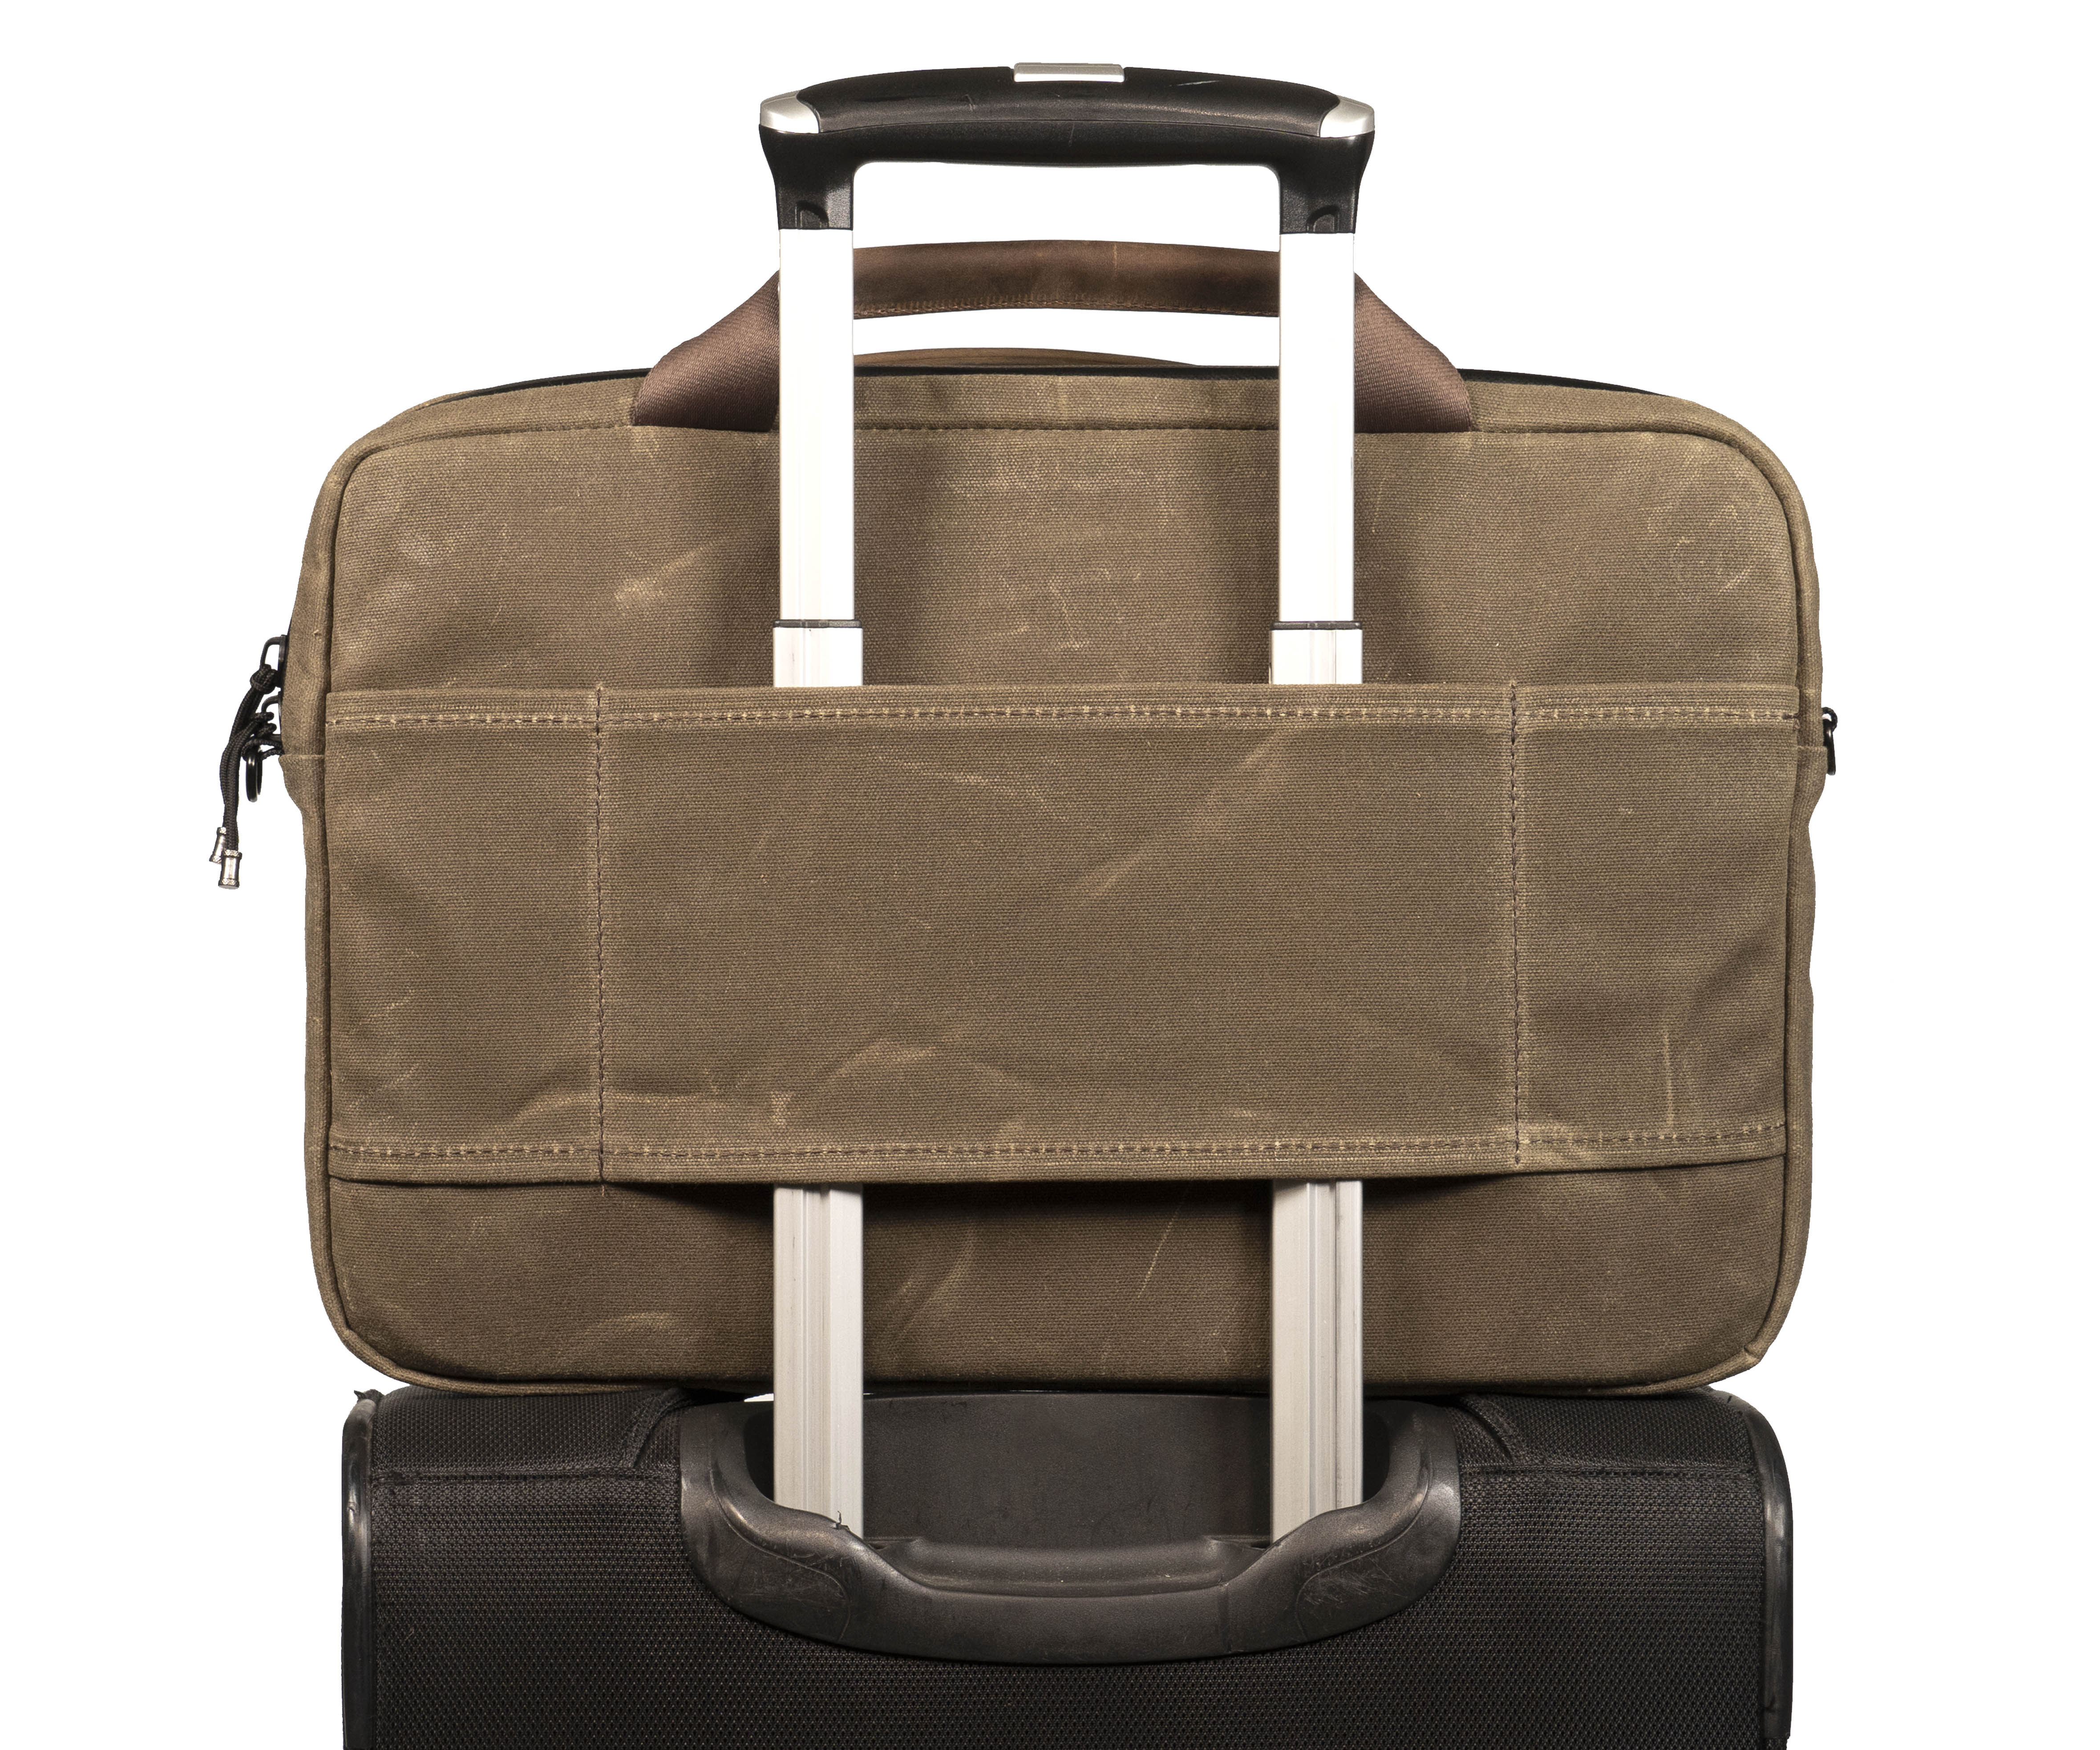 Three carry options: handles, a shoulder strap, and a wheeled suitcase passthrough